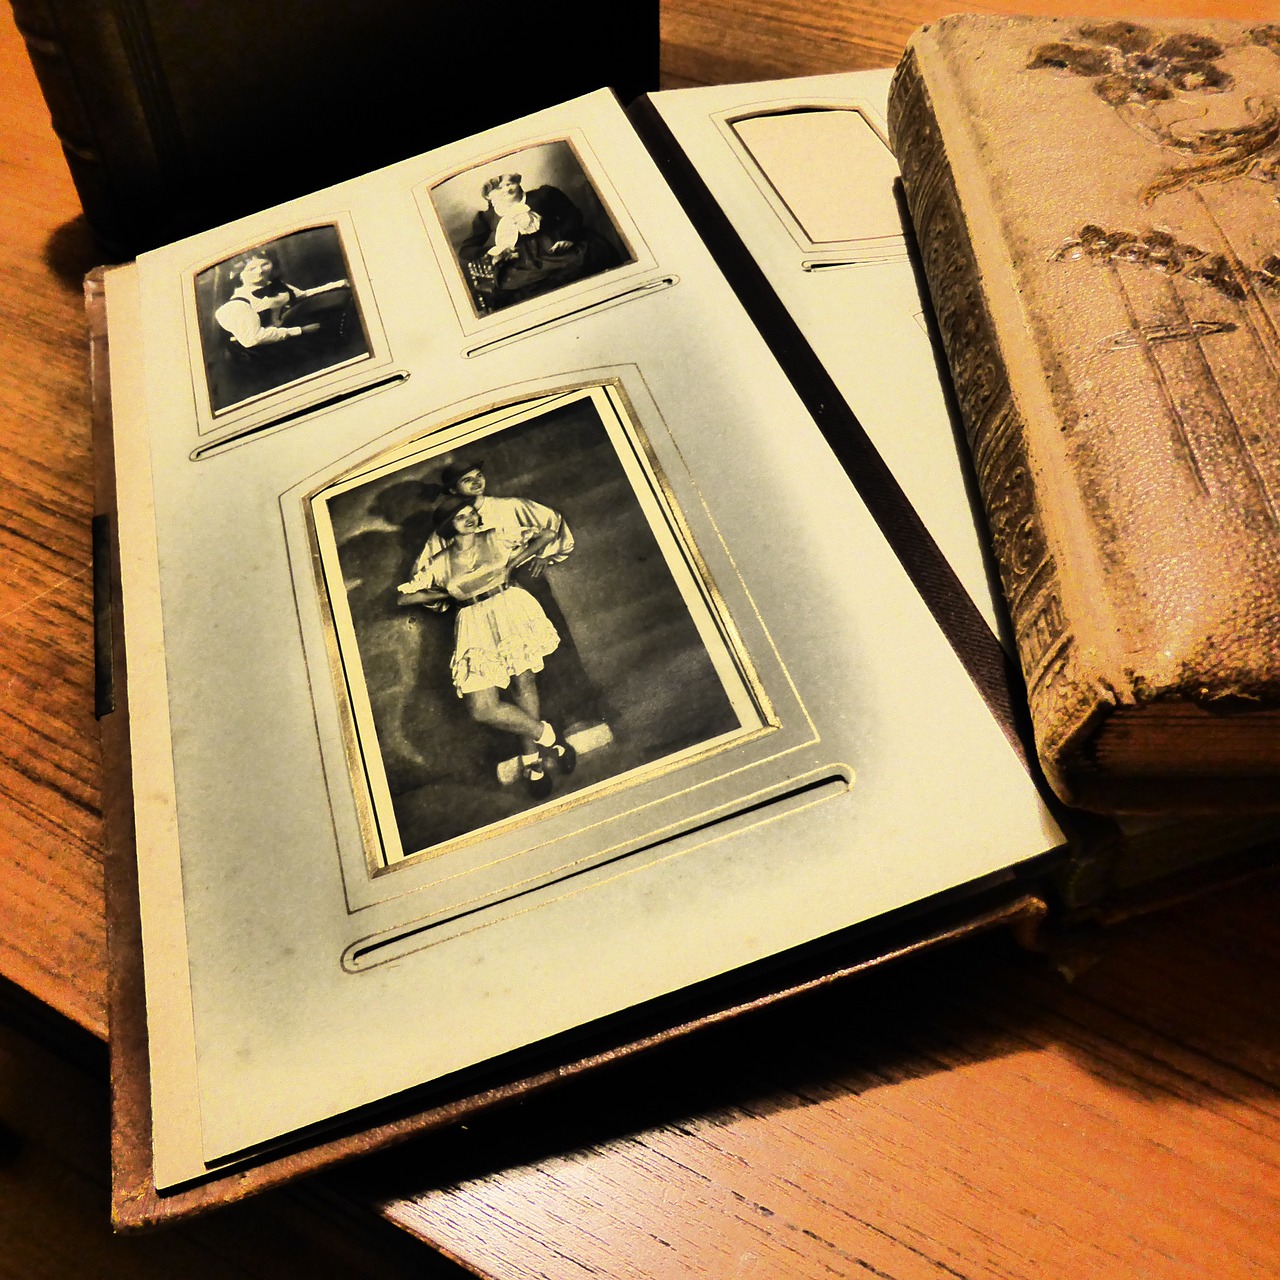 The Art of Print: Creating Family Photo Albums